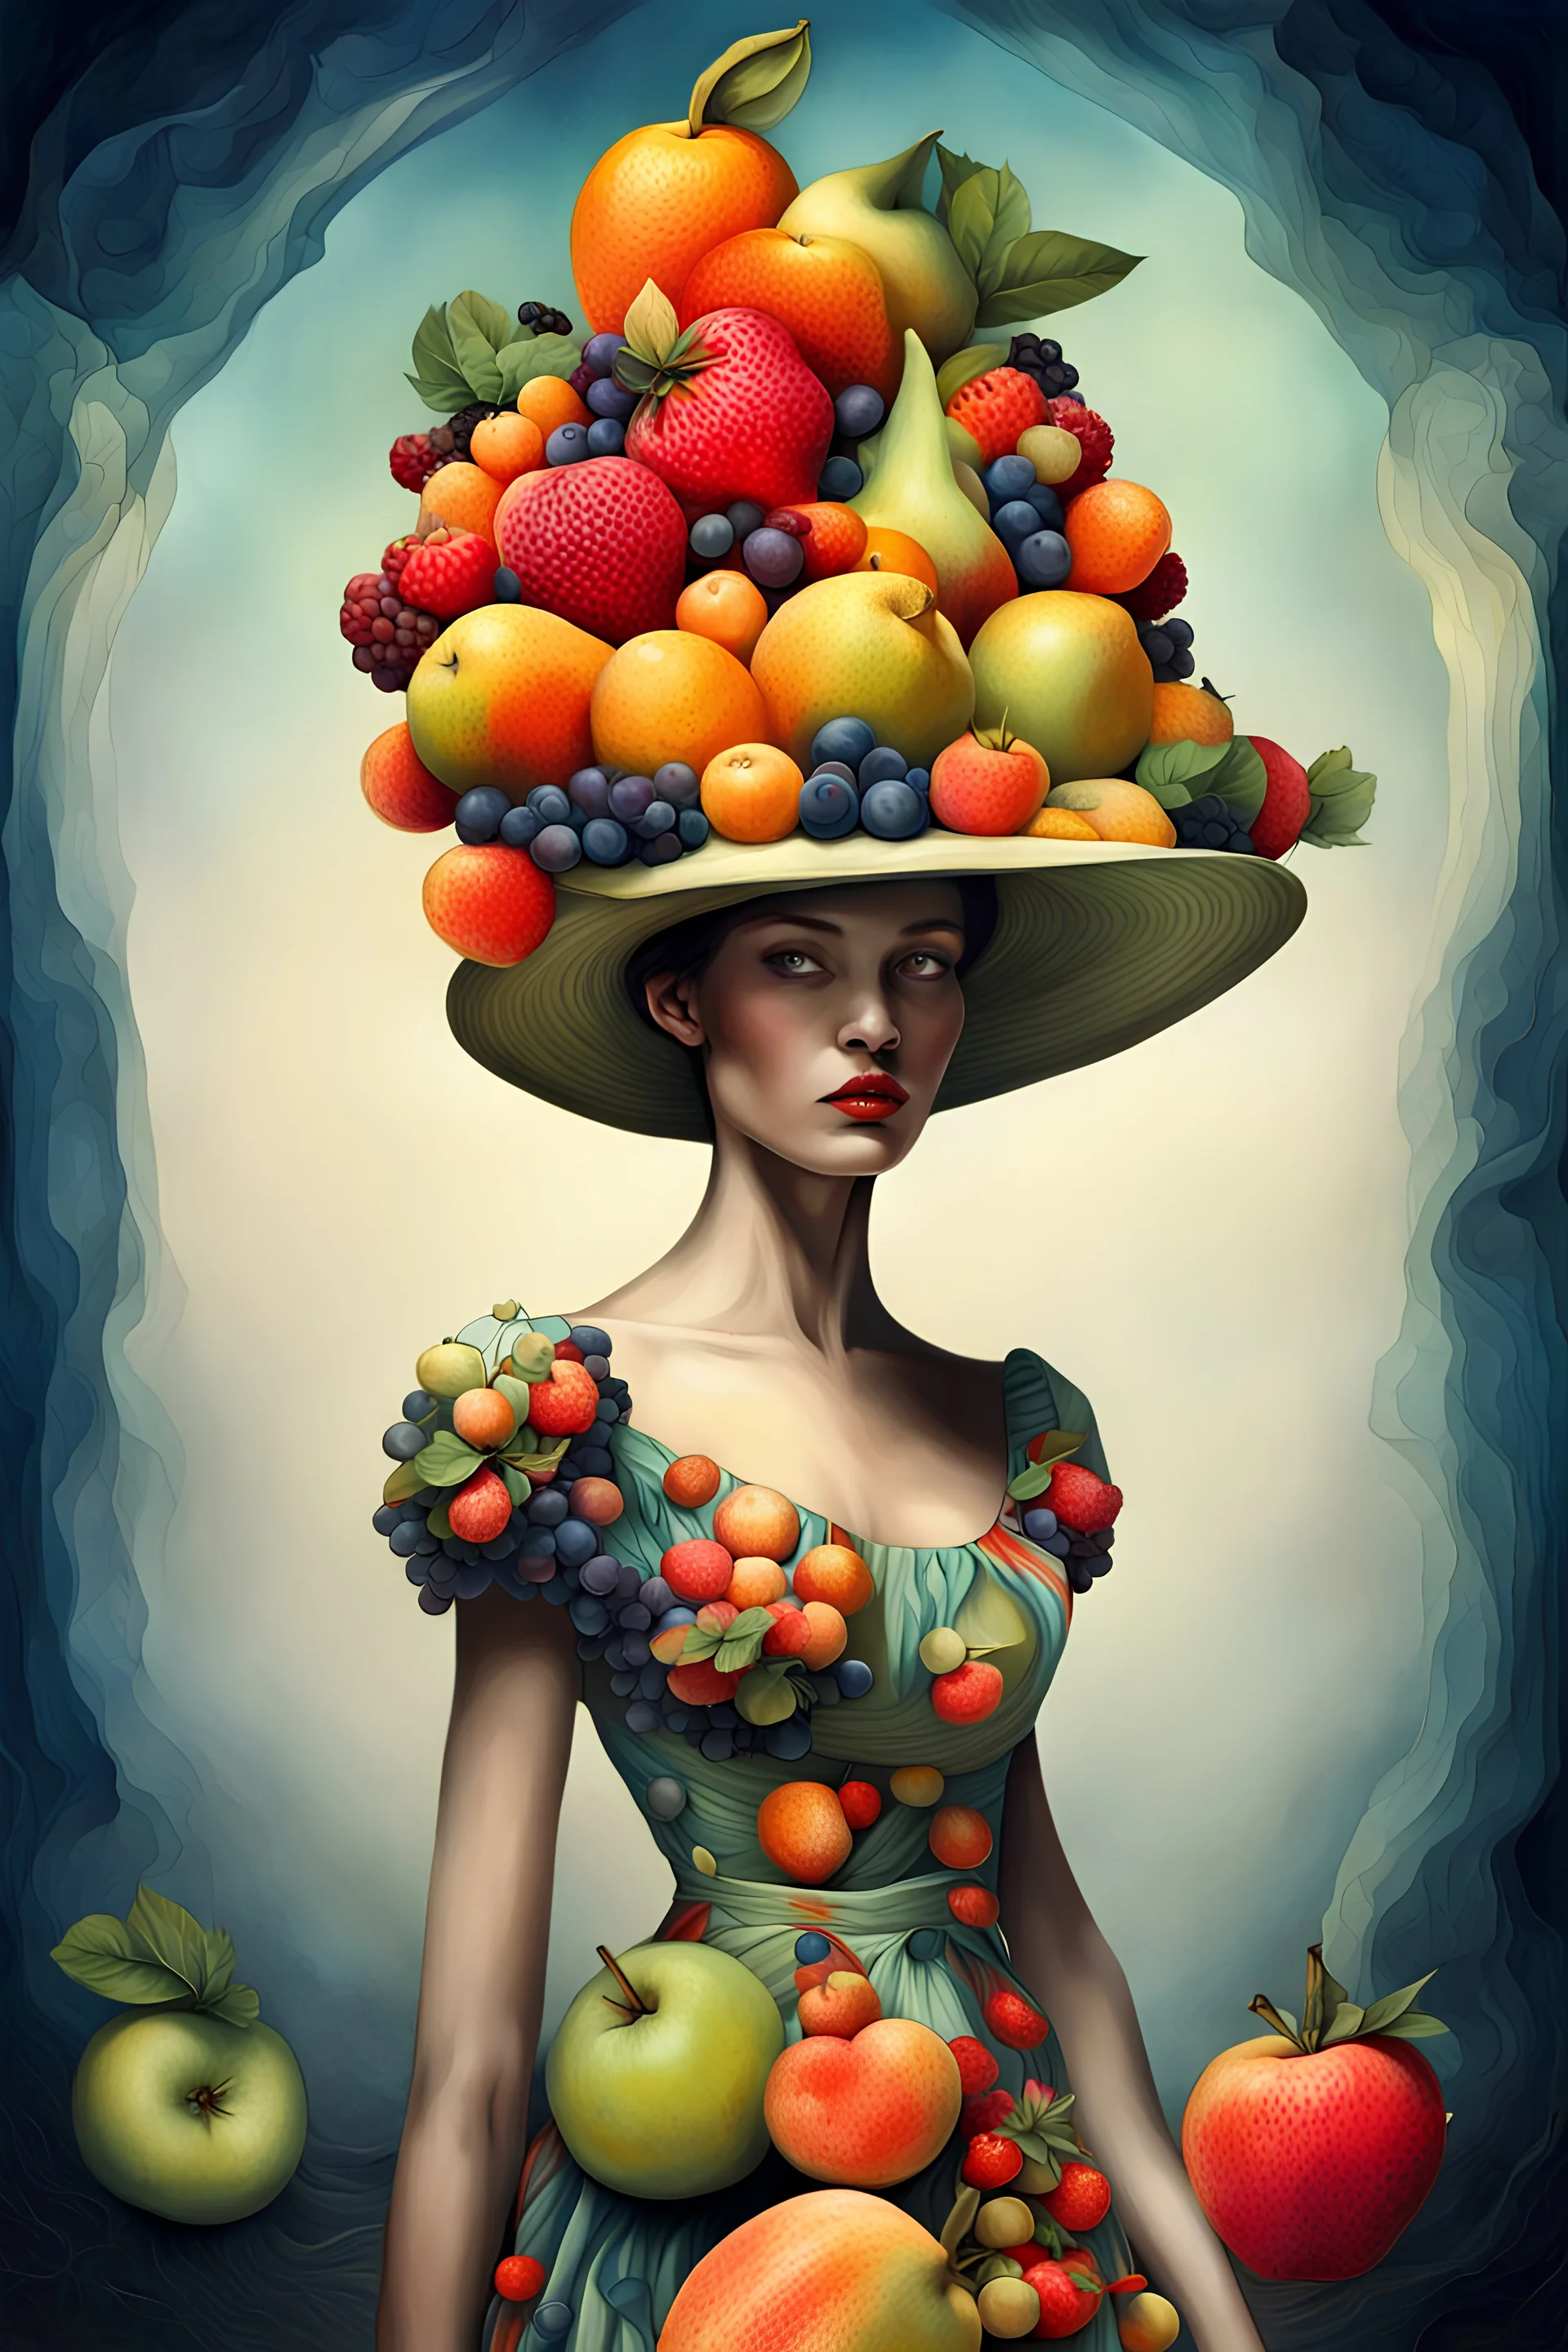 there is a woman in a dress and a hat with fruit on her head, inspired by Arik Brauer, surrealistic digital artwork, inspired by andrey ryabovichev, abstract surrealism, beautiful digital artwork, inspired by Ignacy Witkiewicz, inspired by Darek Zabrocki, stunning digital art, surreal digital art, gorgeous digital art